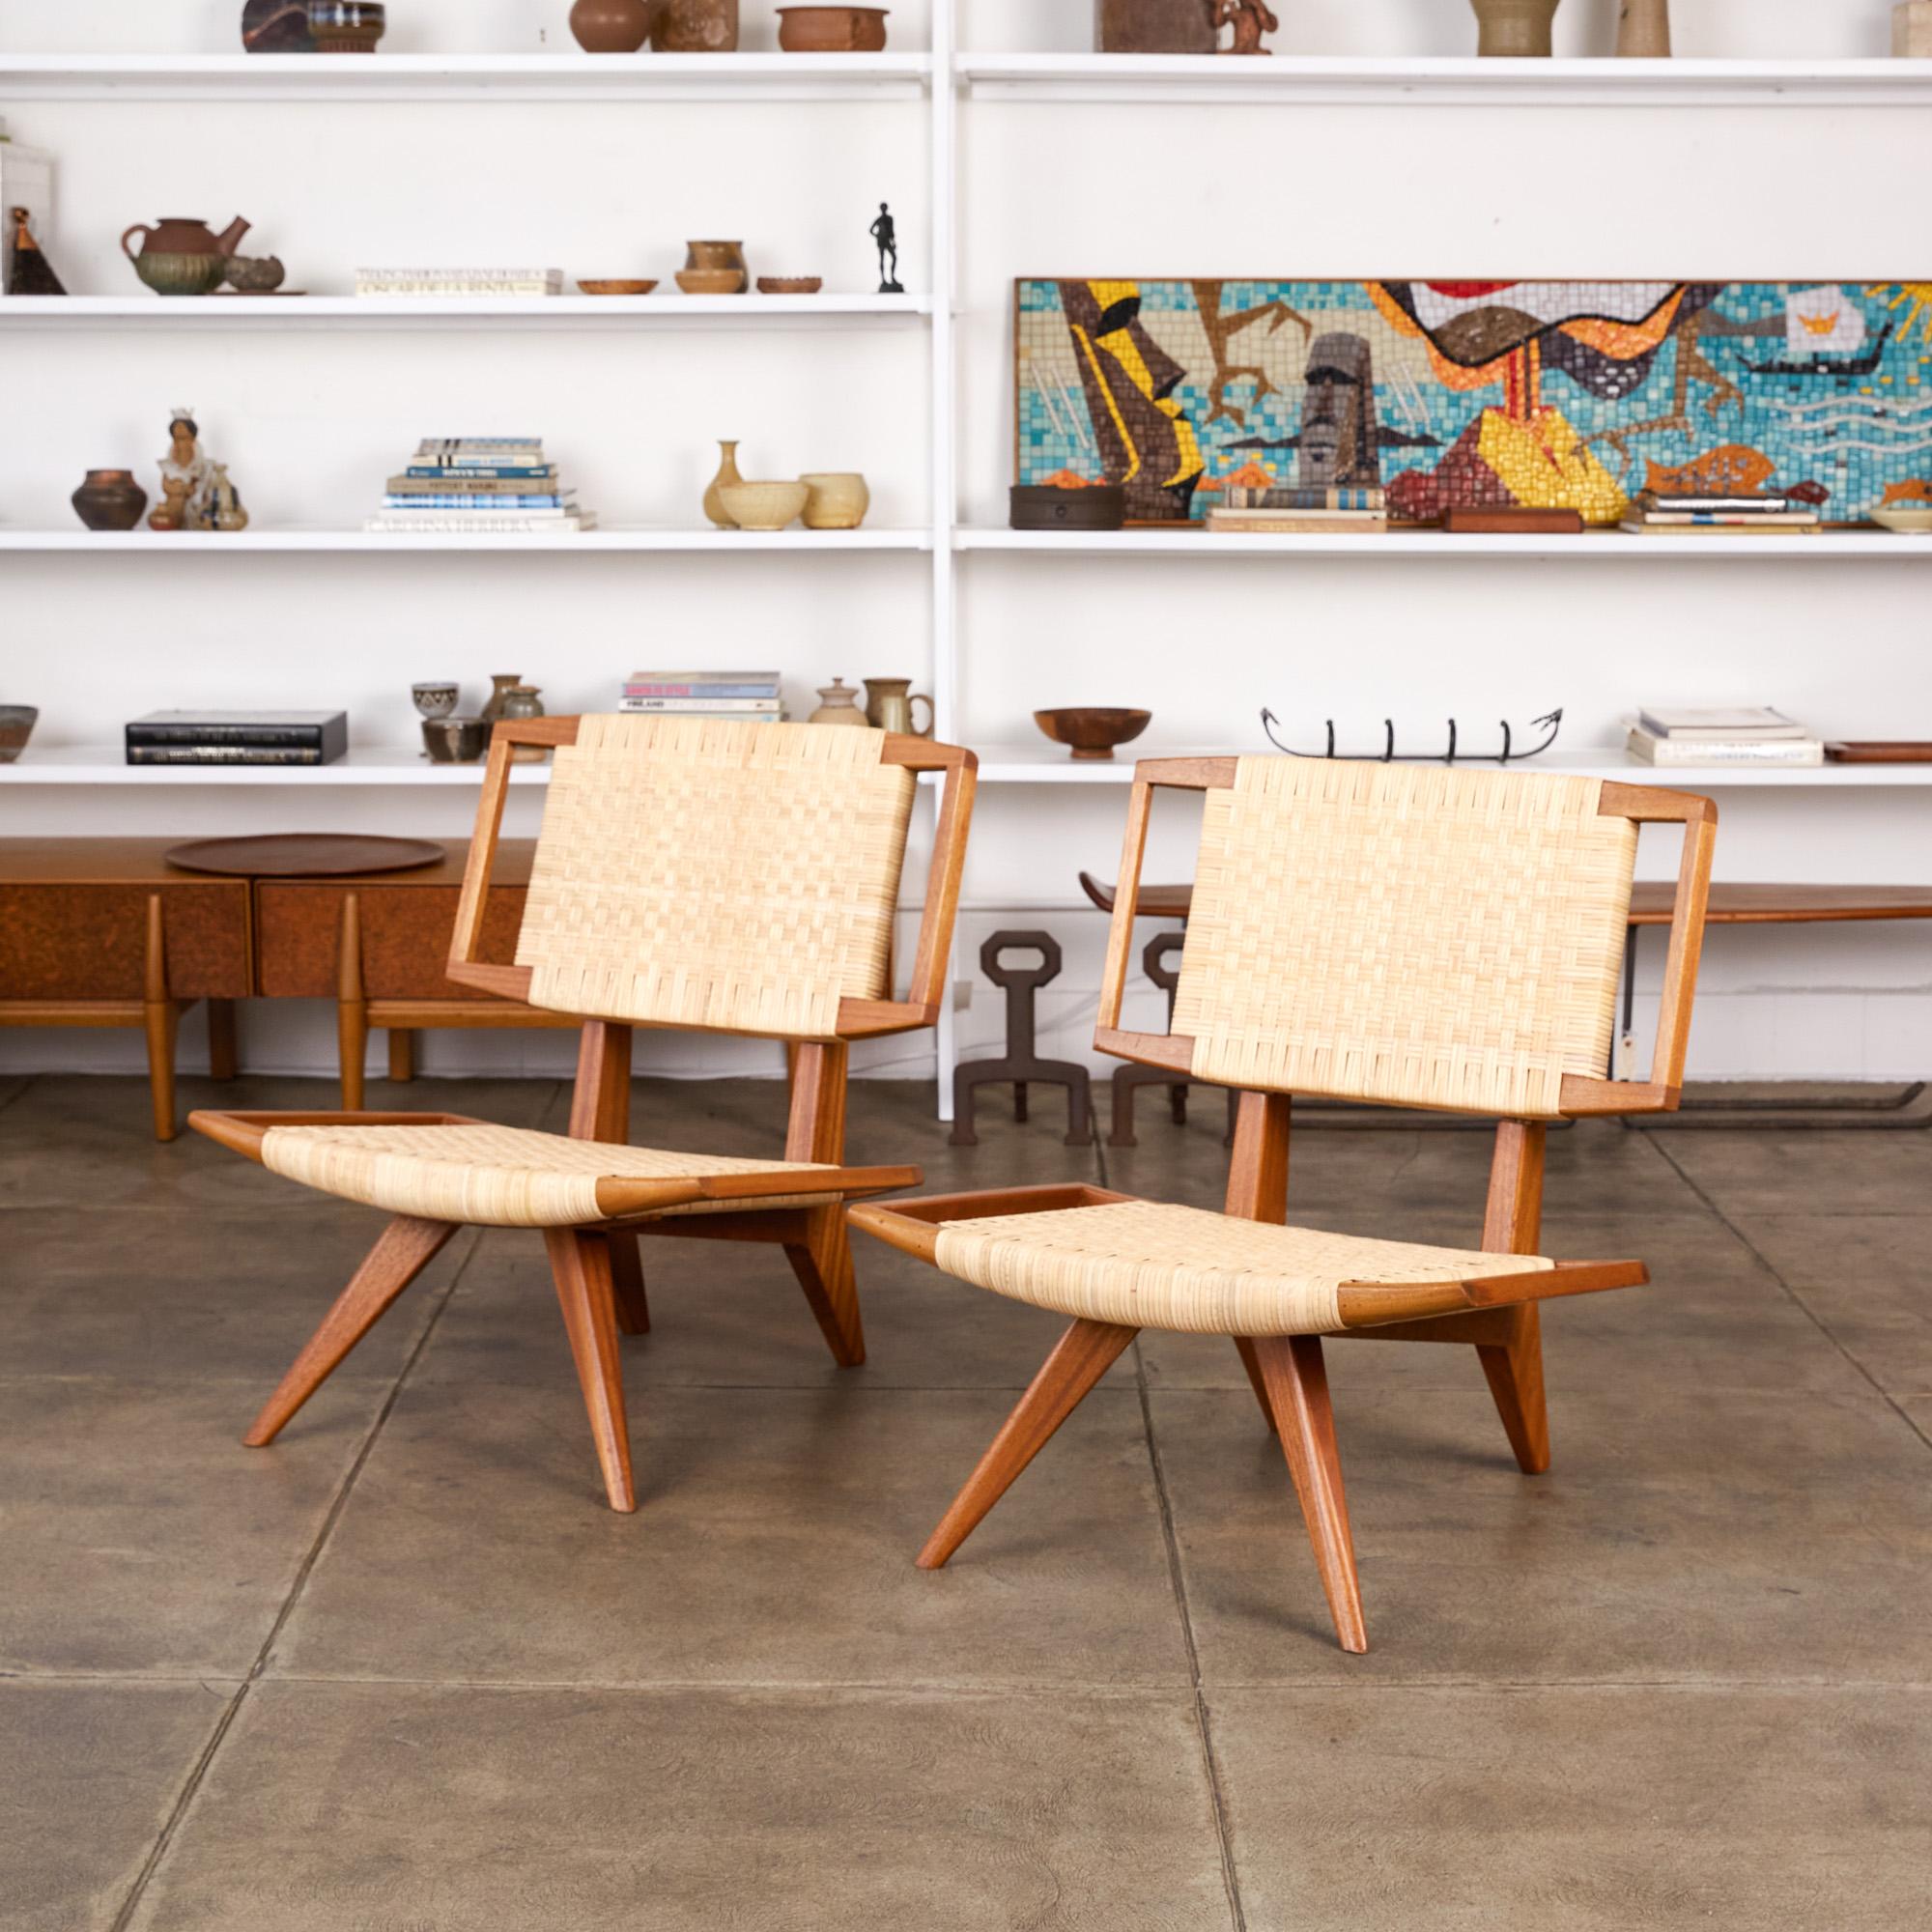 A pair of rare, museum grade lounge chairs by Paul Laszlo for Glenn of California, circa 1950s. The chairs feature an oiled mahogany frame with newly woven cane seat and back. The woven seat lays atop the frame that is supported by outwardly pitched